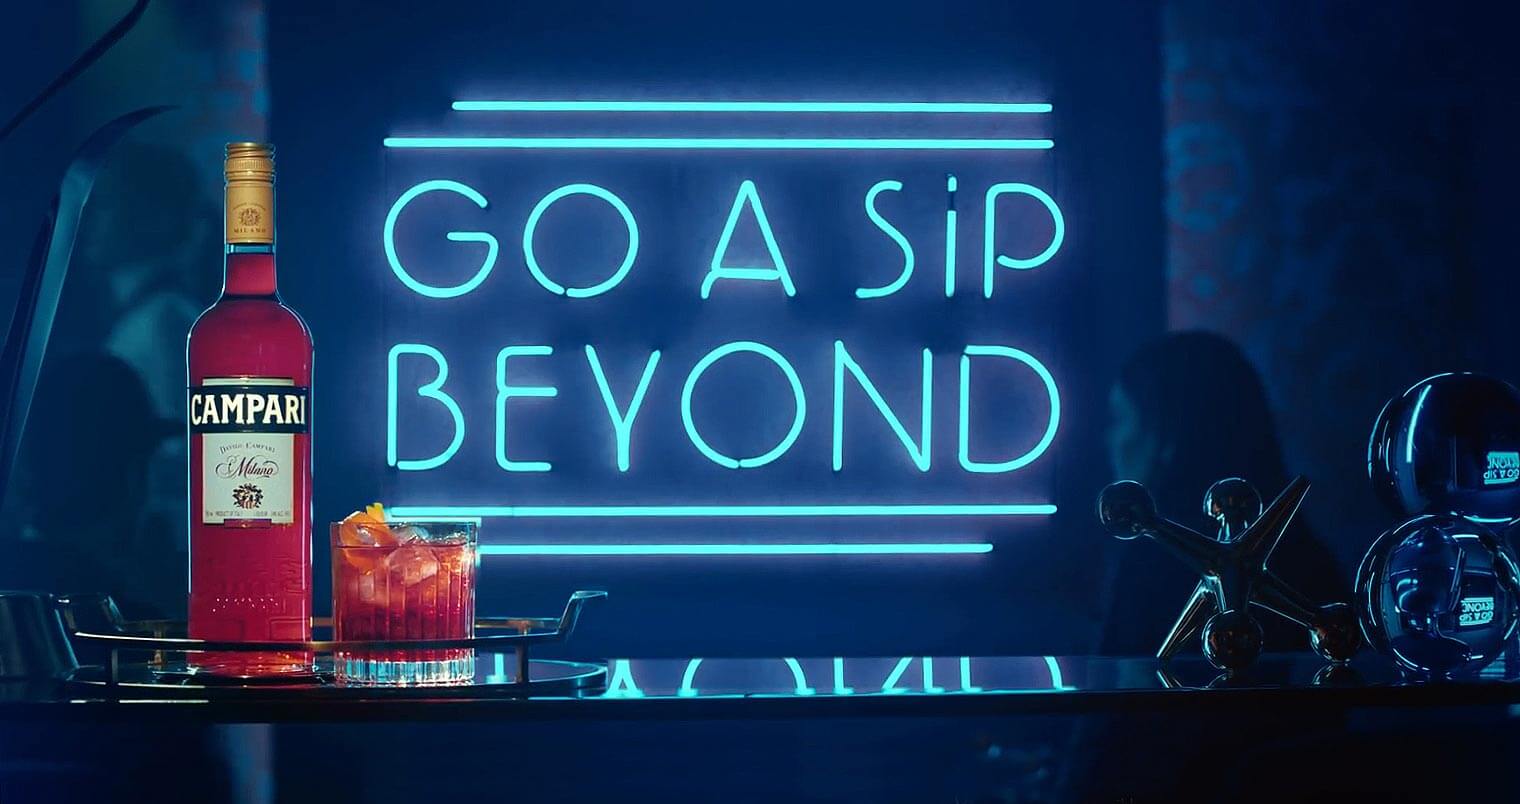 Campari "Go a Sip Beyond", featured image